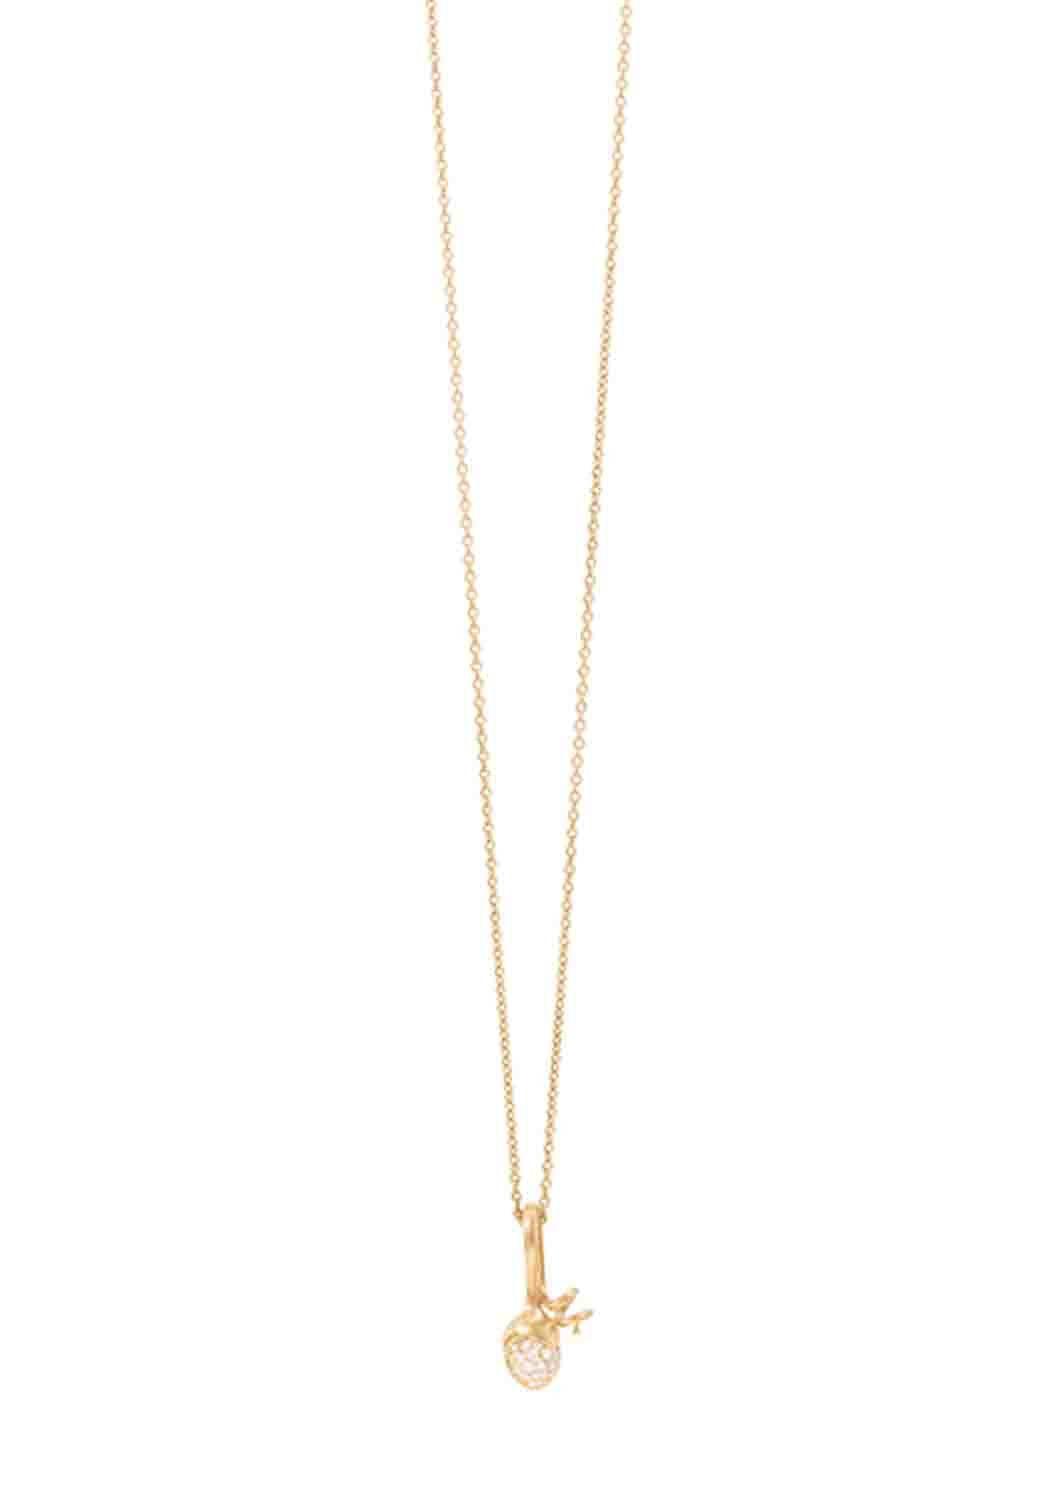 OLE LYNGGAARD Lotus Sprout 18KYG Pavé Diamond Pendant (chain sold separately) | OsterJewelers.com